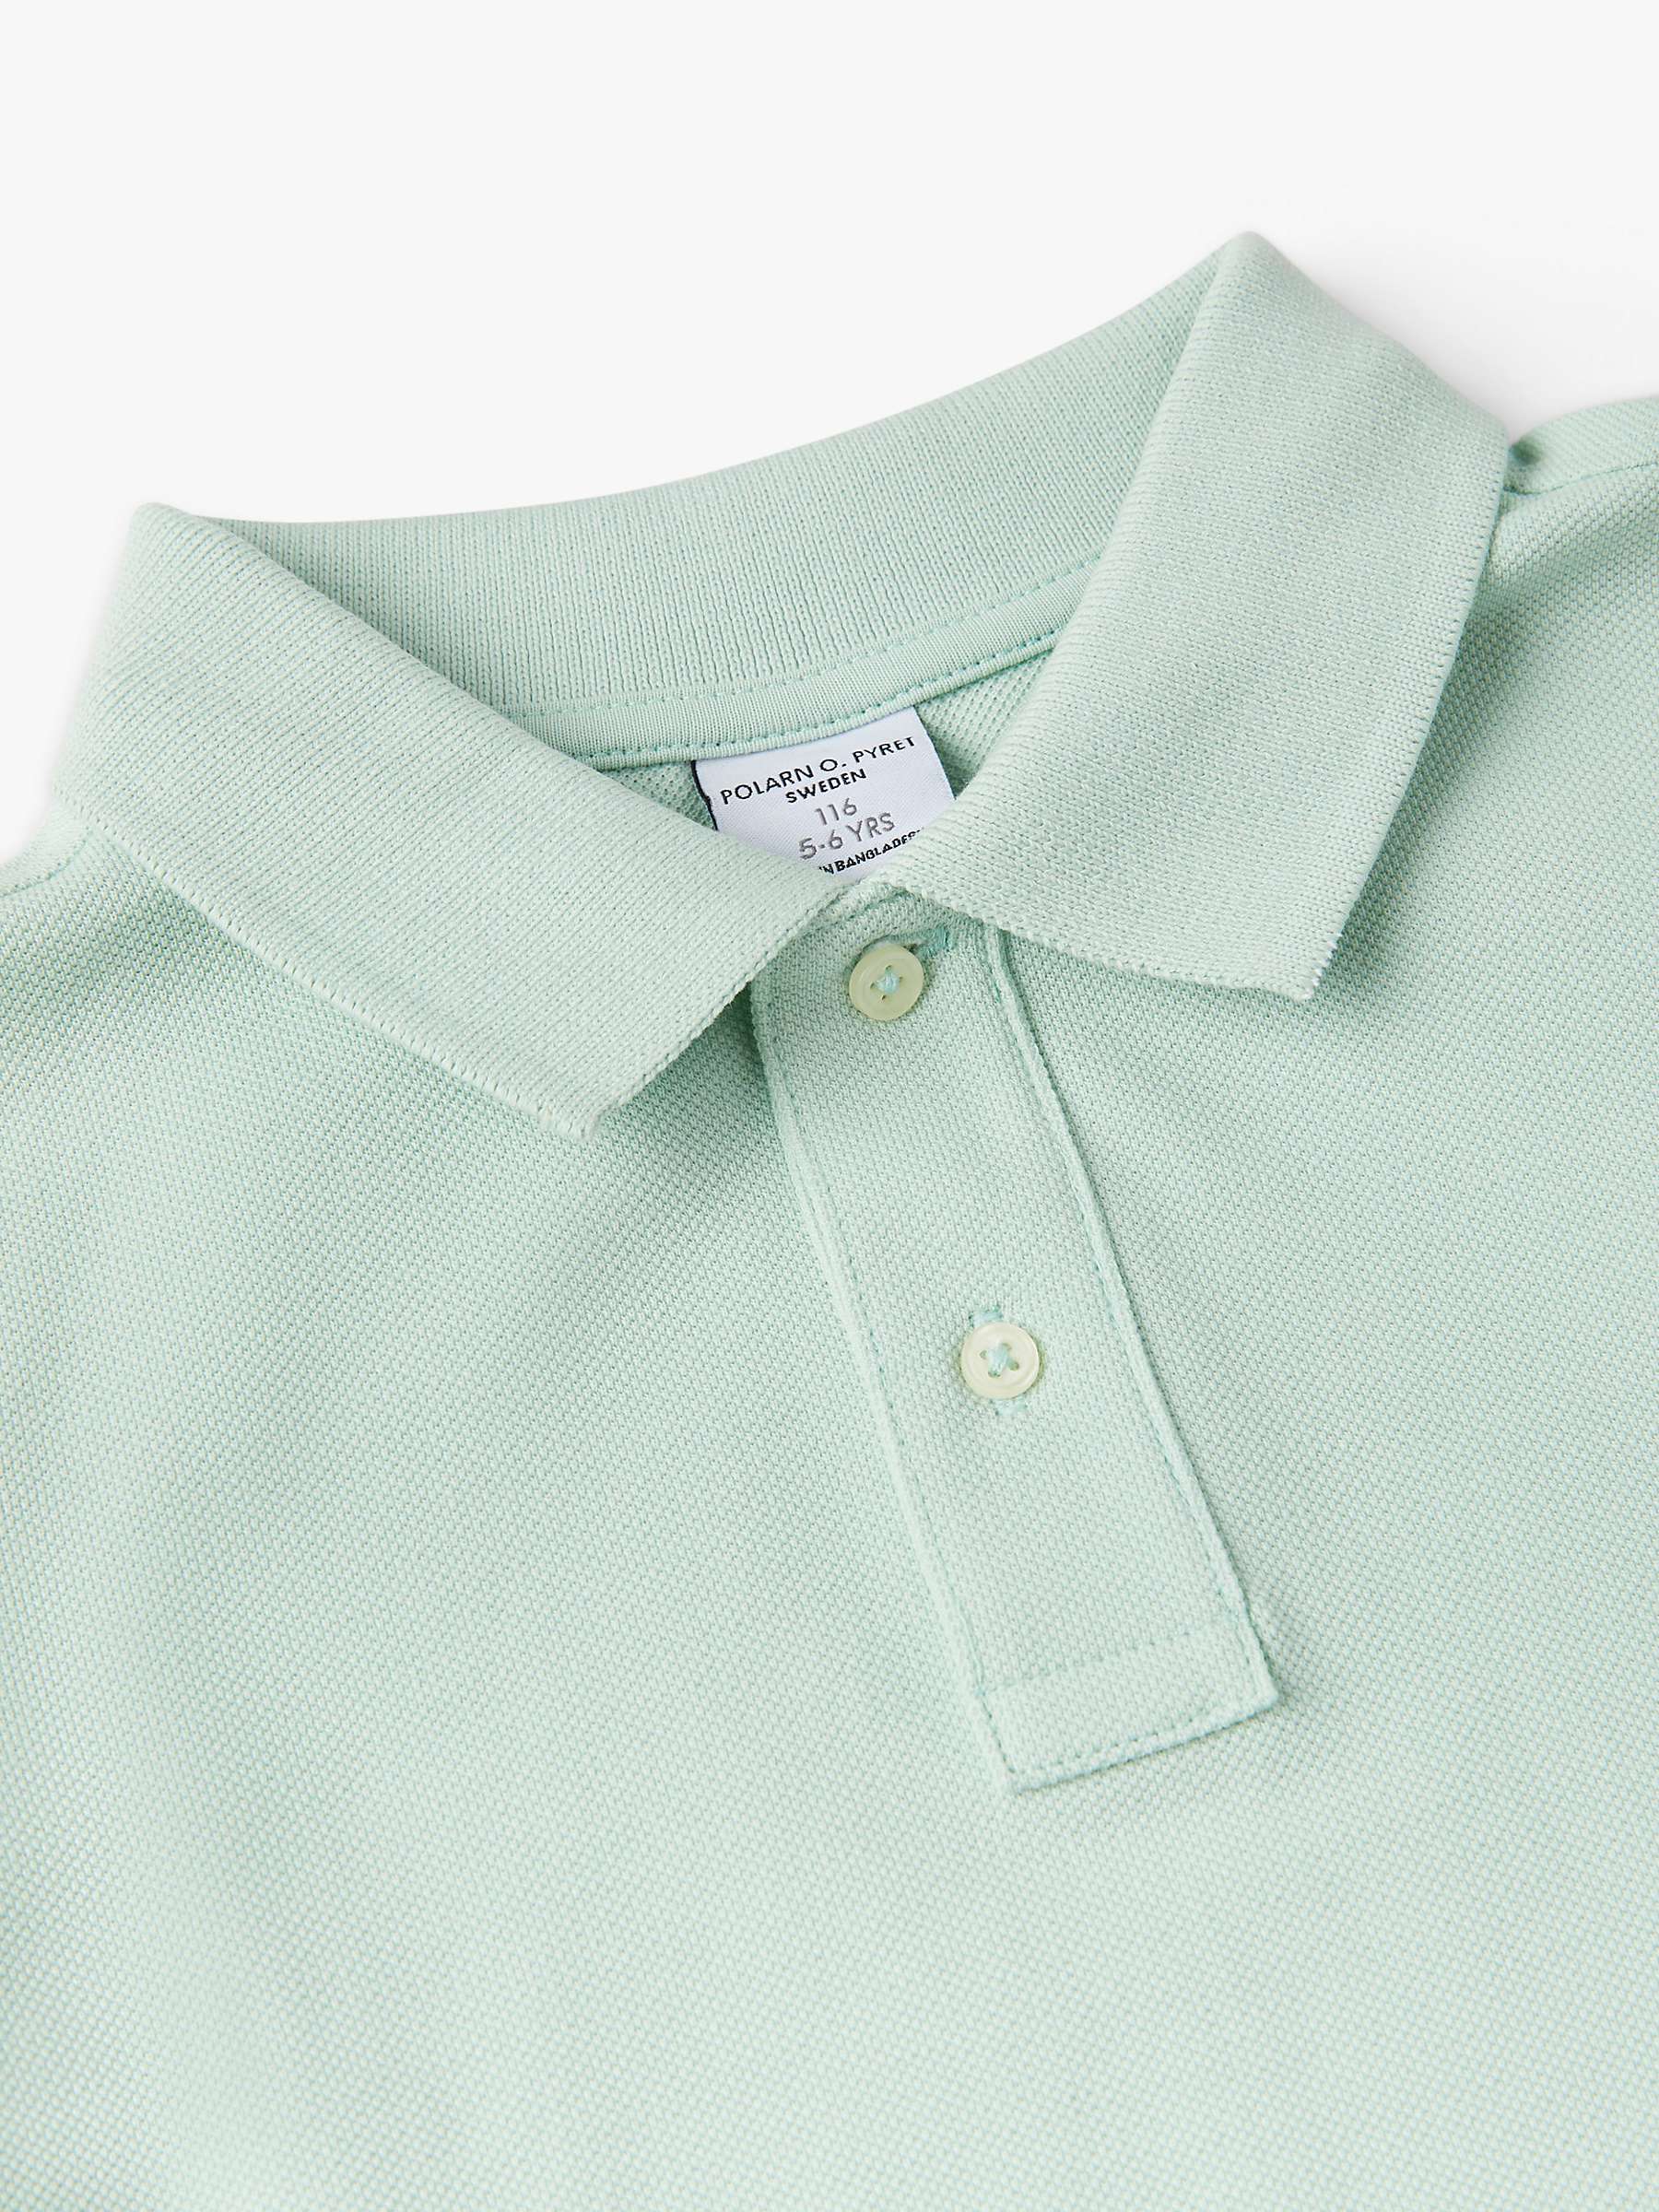 Buy Polarn O. Pyret Kids' Organic Cotton Solid Polo Shirt, Duck Egg Blue Online at johnlewis.com